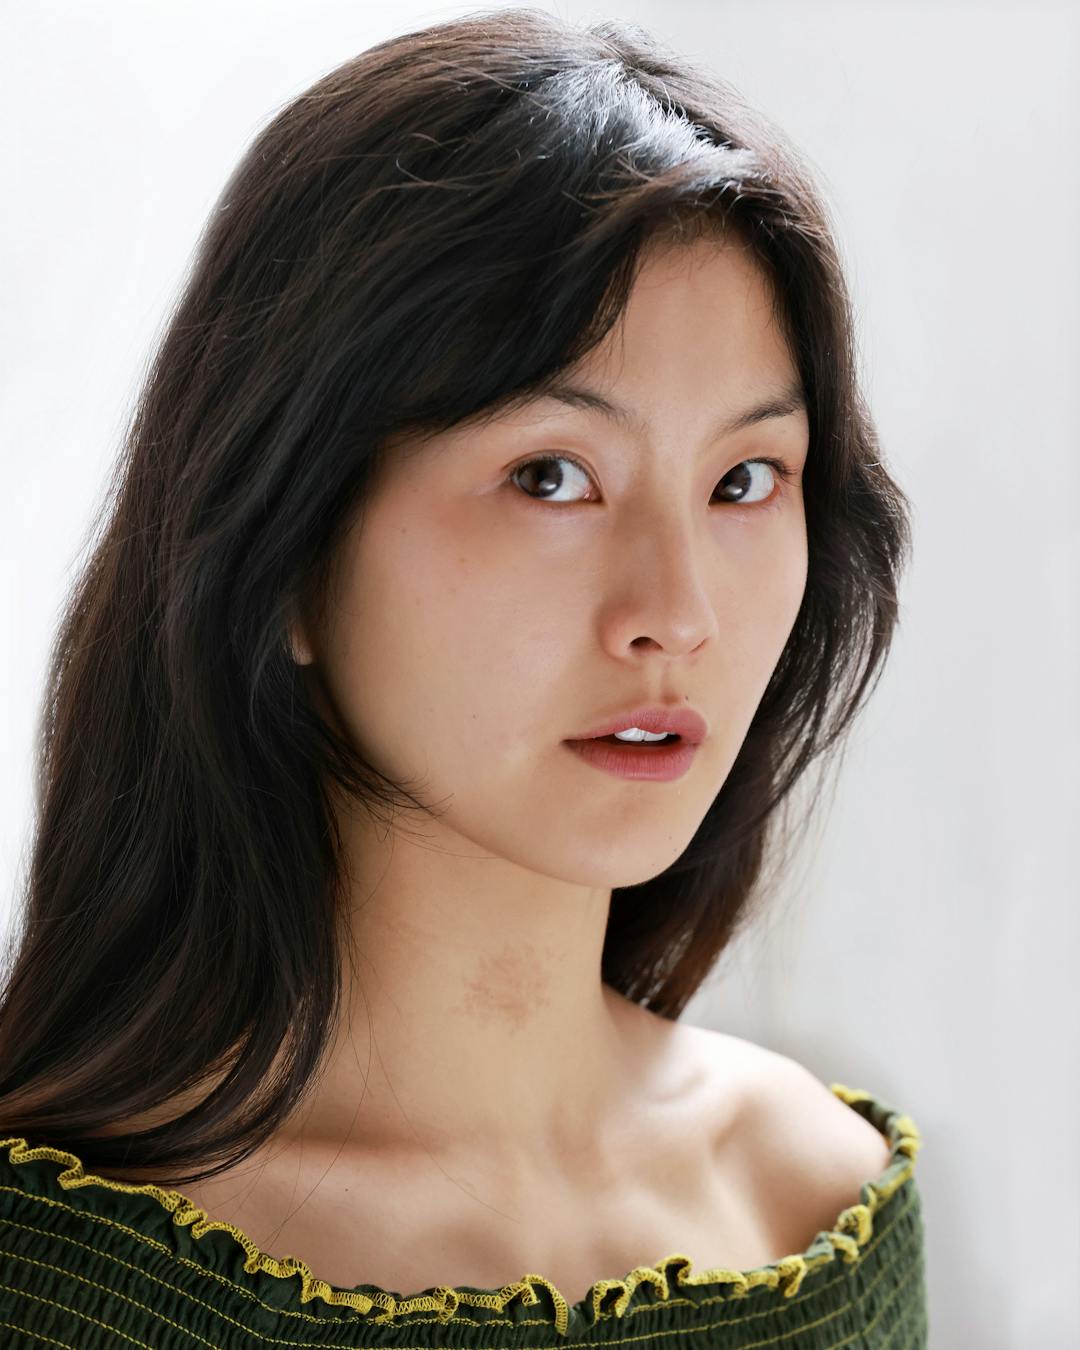 Young East Asian woman with dark brown hair falling past her shoulders and a green off the shoulder top.